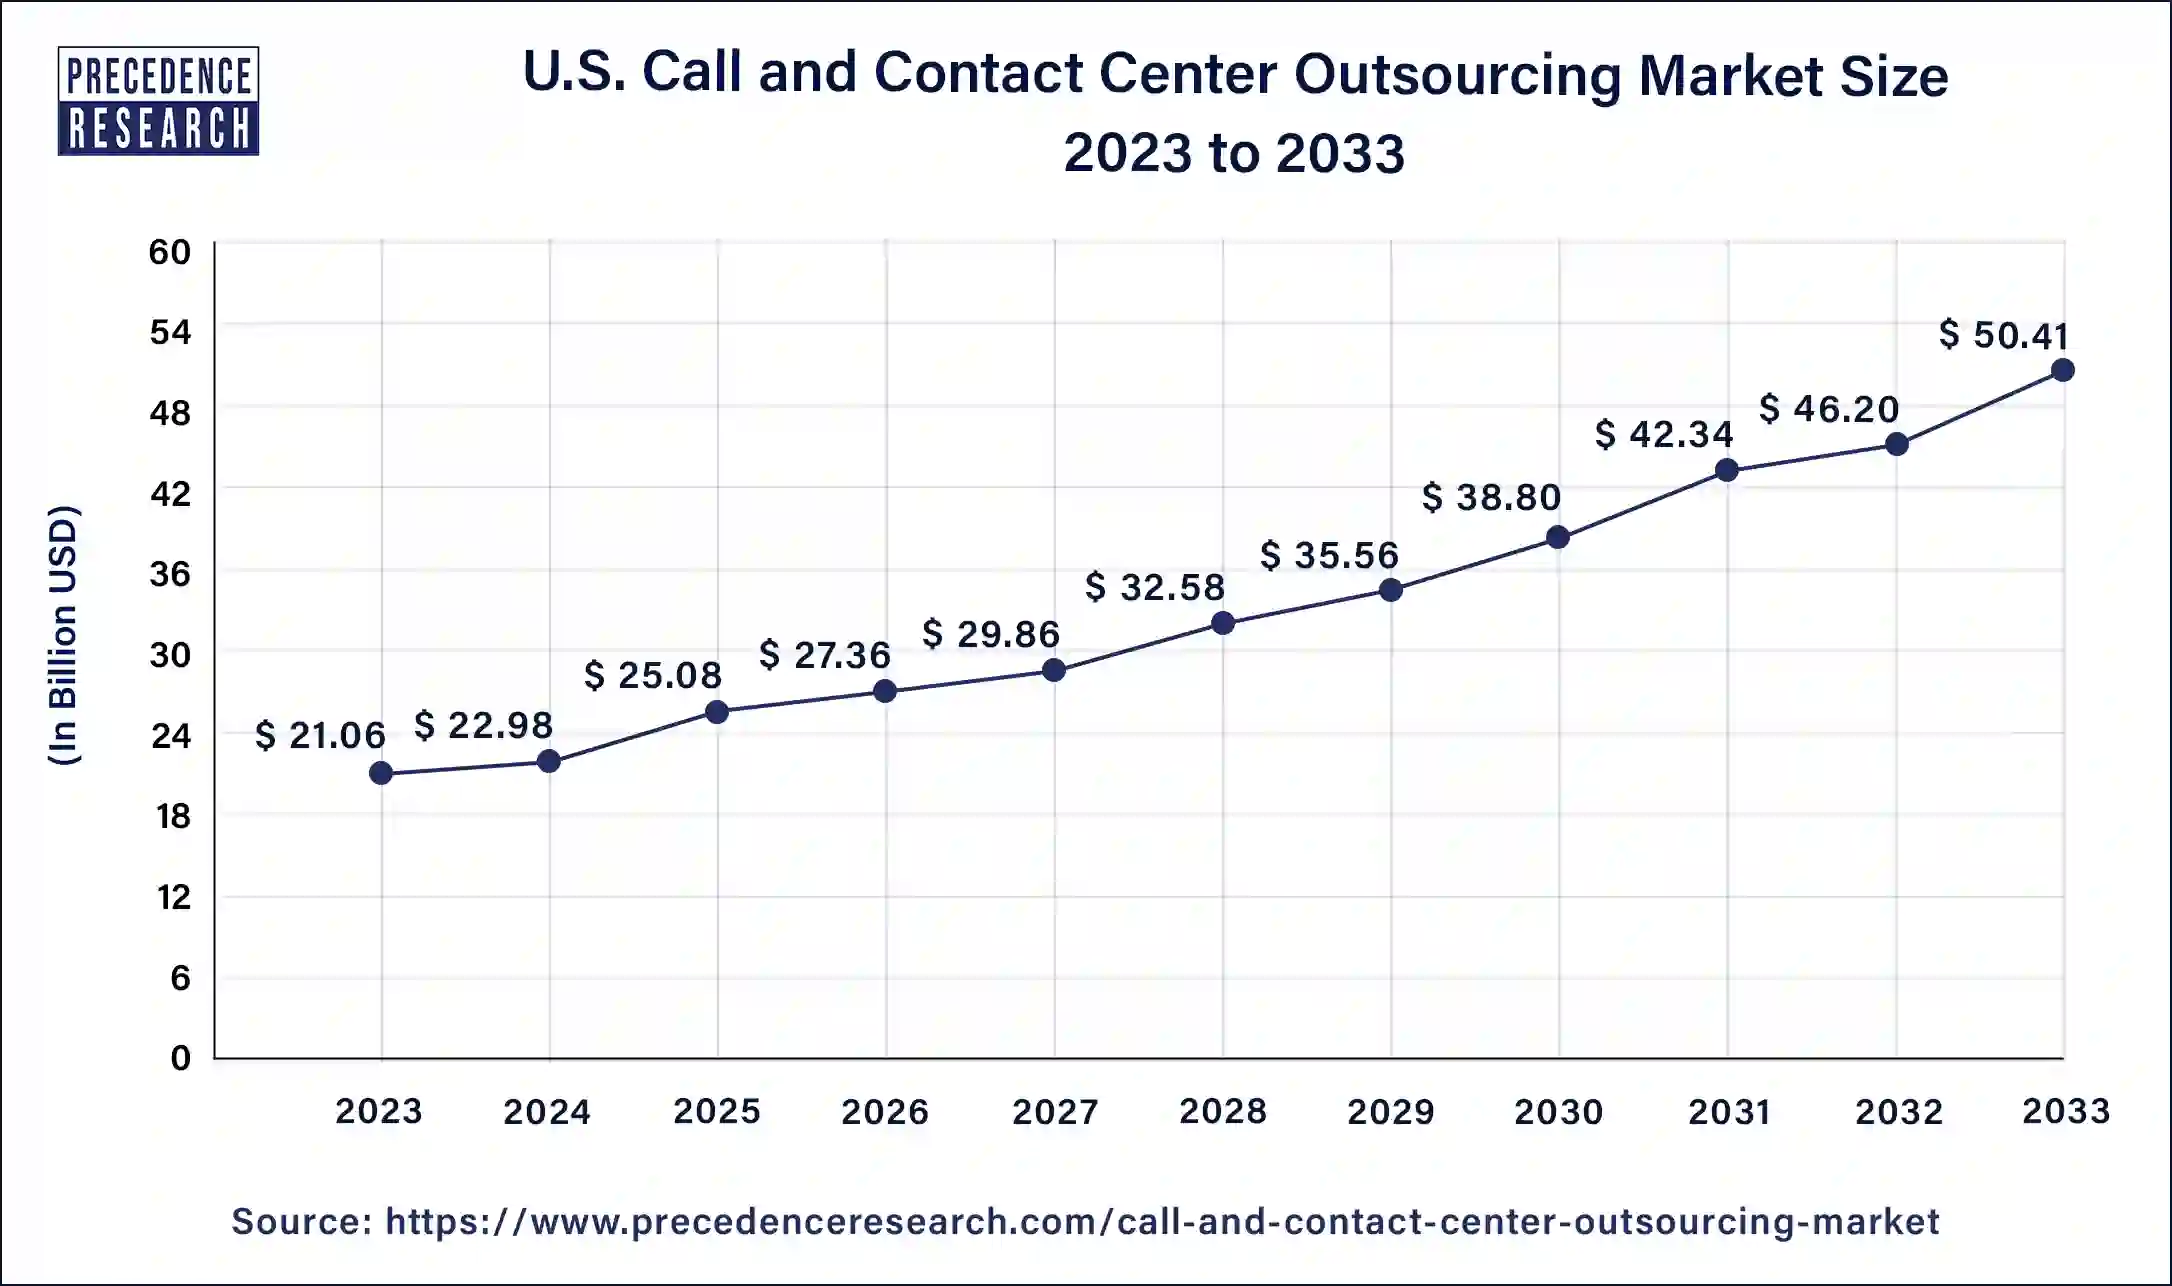 U.S. Call and Contact Center Outsourcing Market Size 2024 to 2033